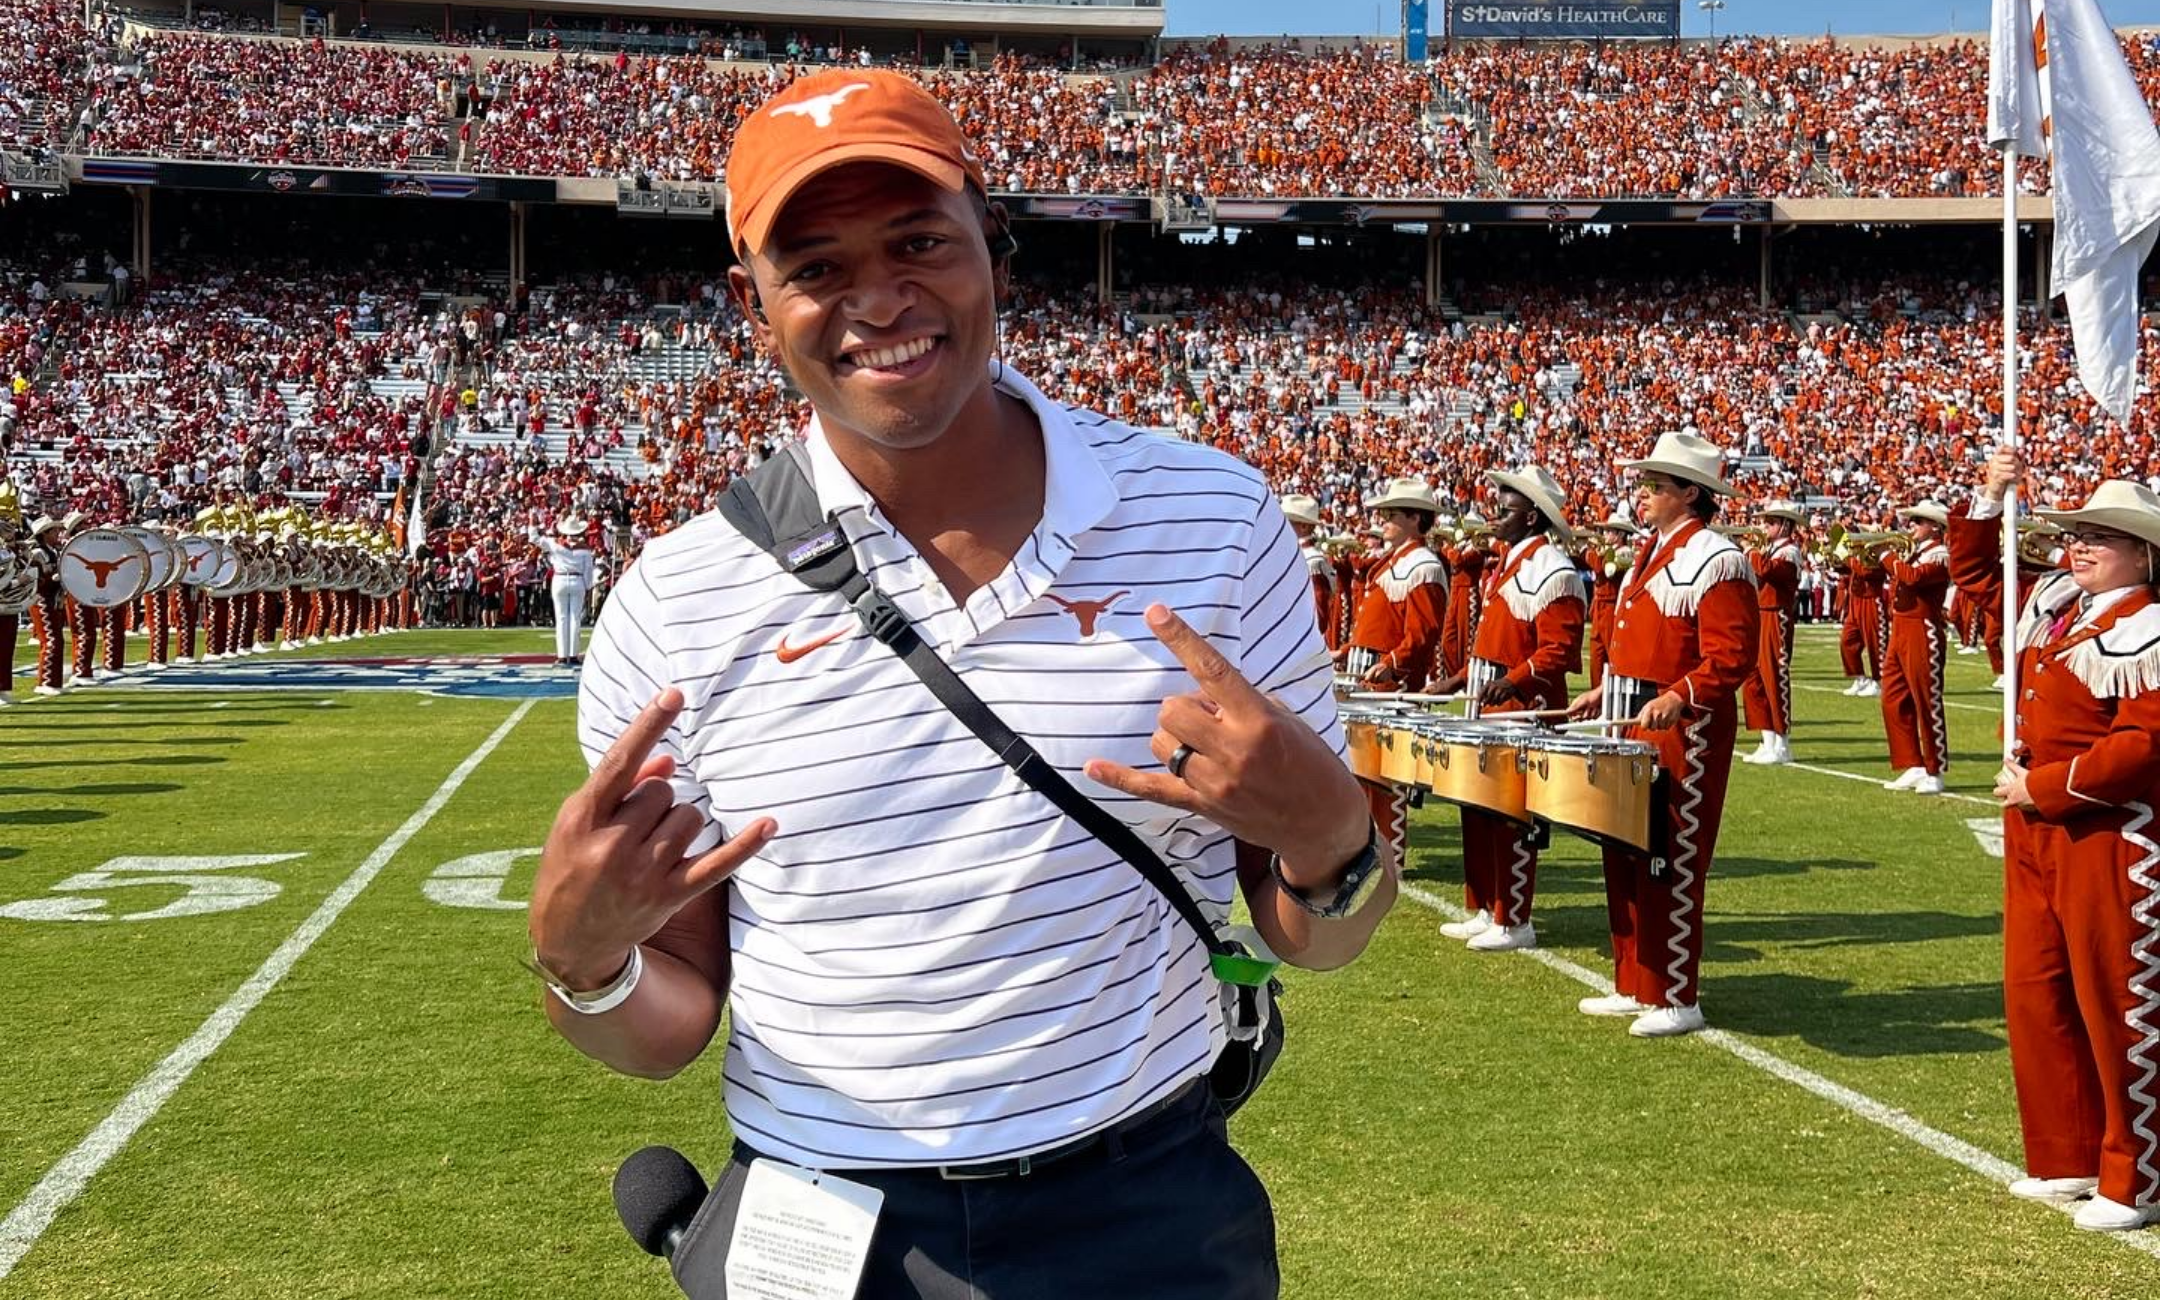 Hook ’em: How a former Texas Longhorn is giving back to the community